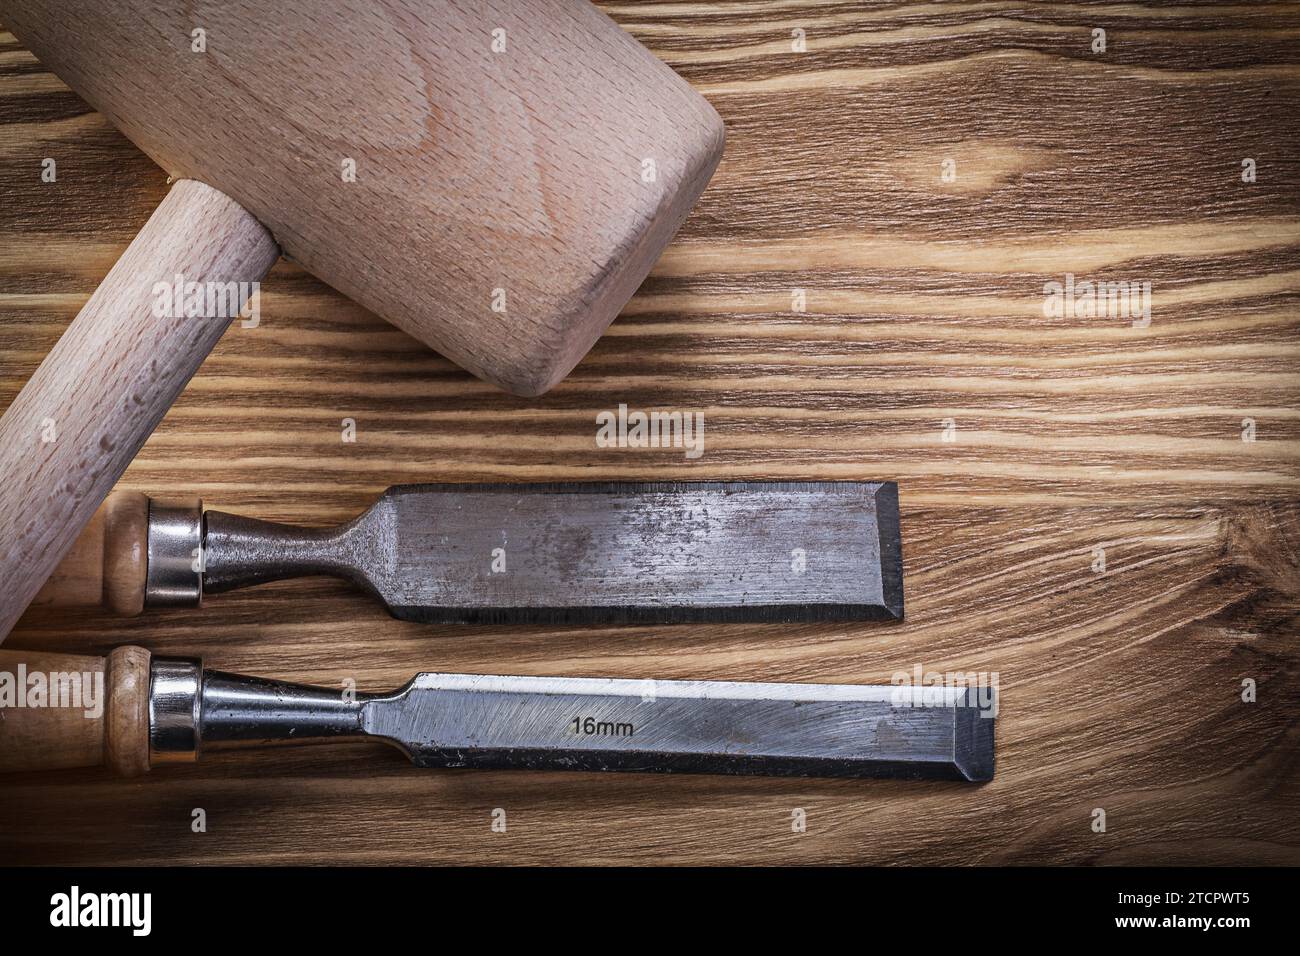 Lump hammer fixed chisel on vintage wooden board building concept Stock Photo